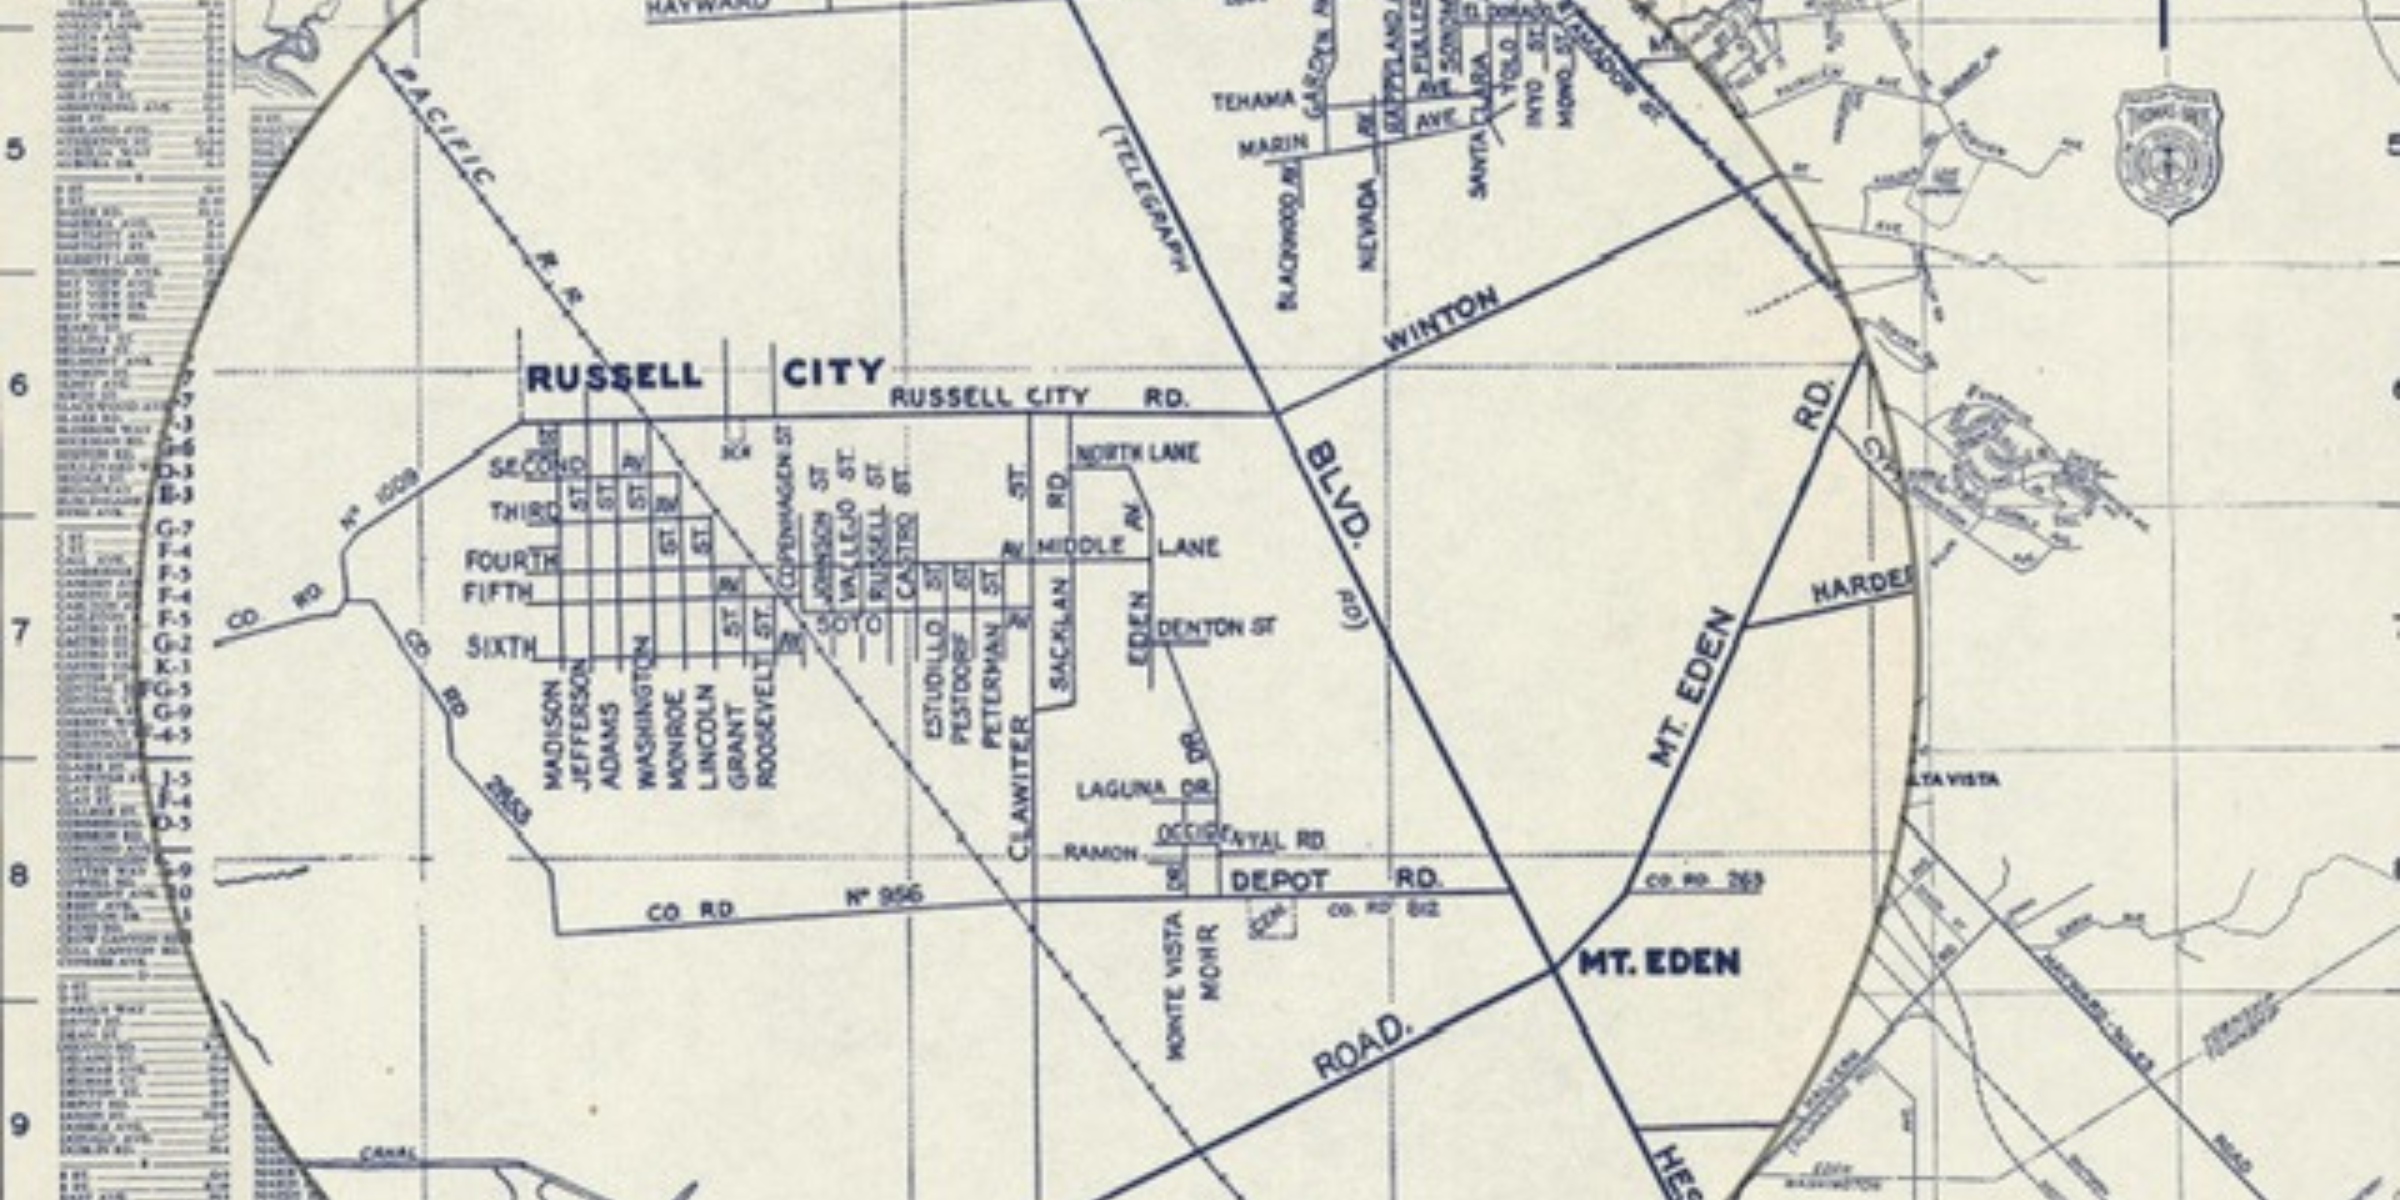 A look at a historical map of Russell City